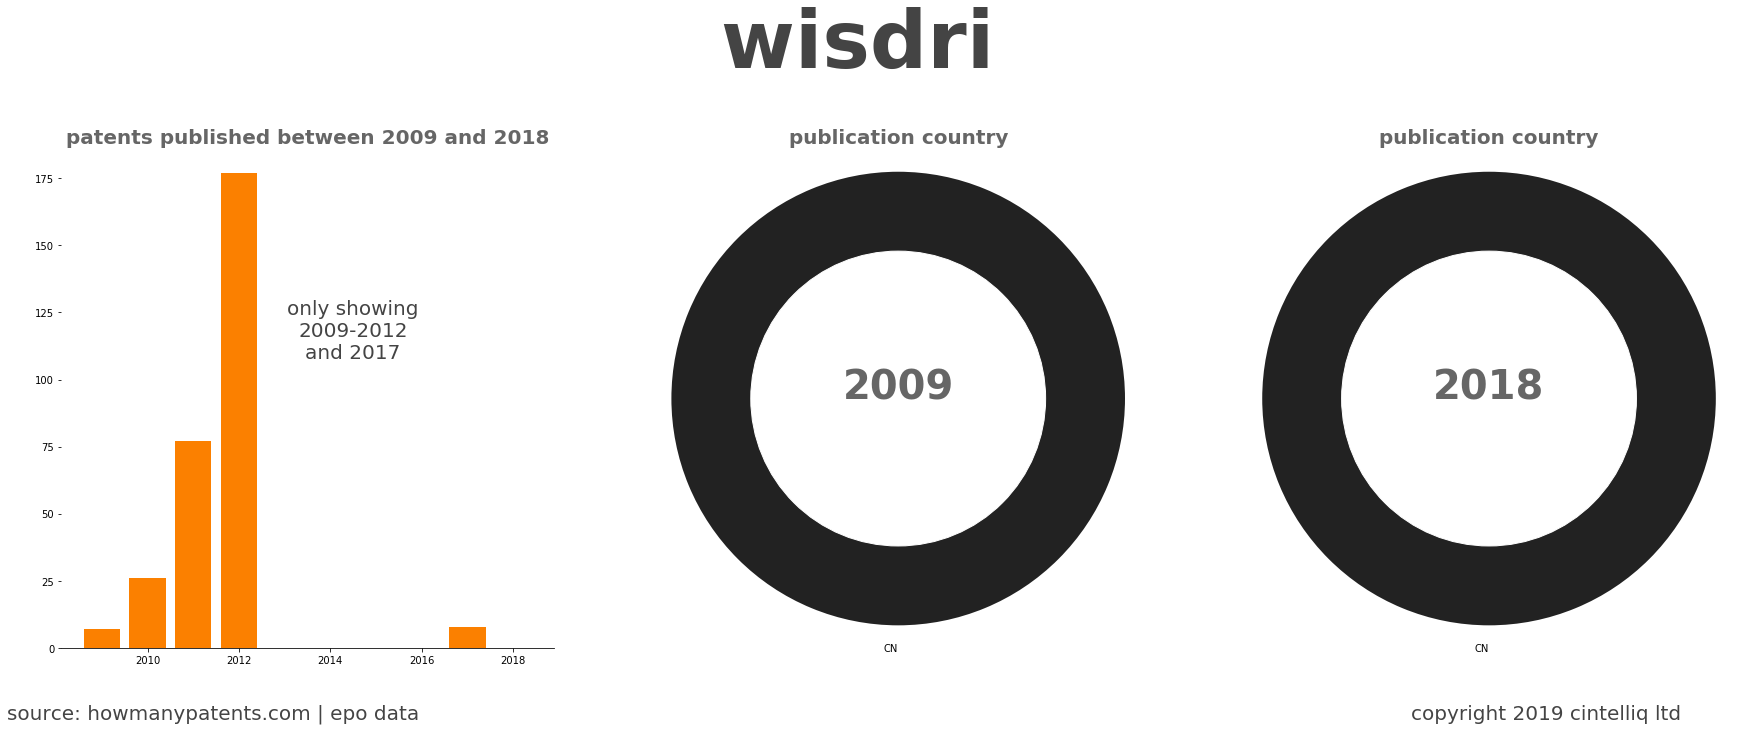 summary of patents for Wisdri 